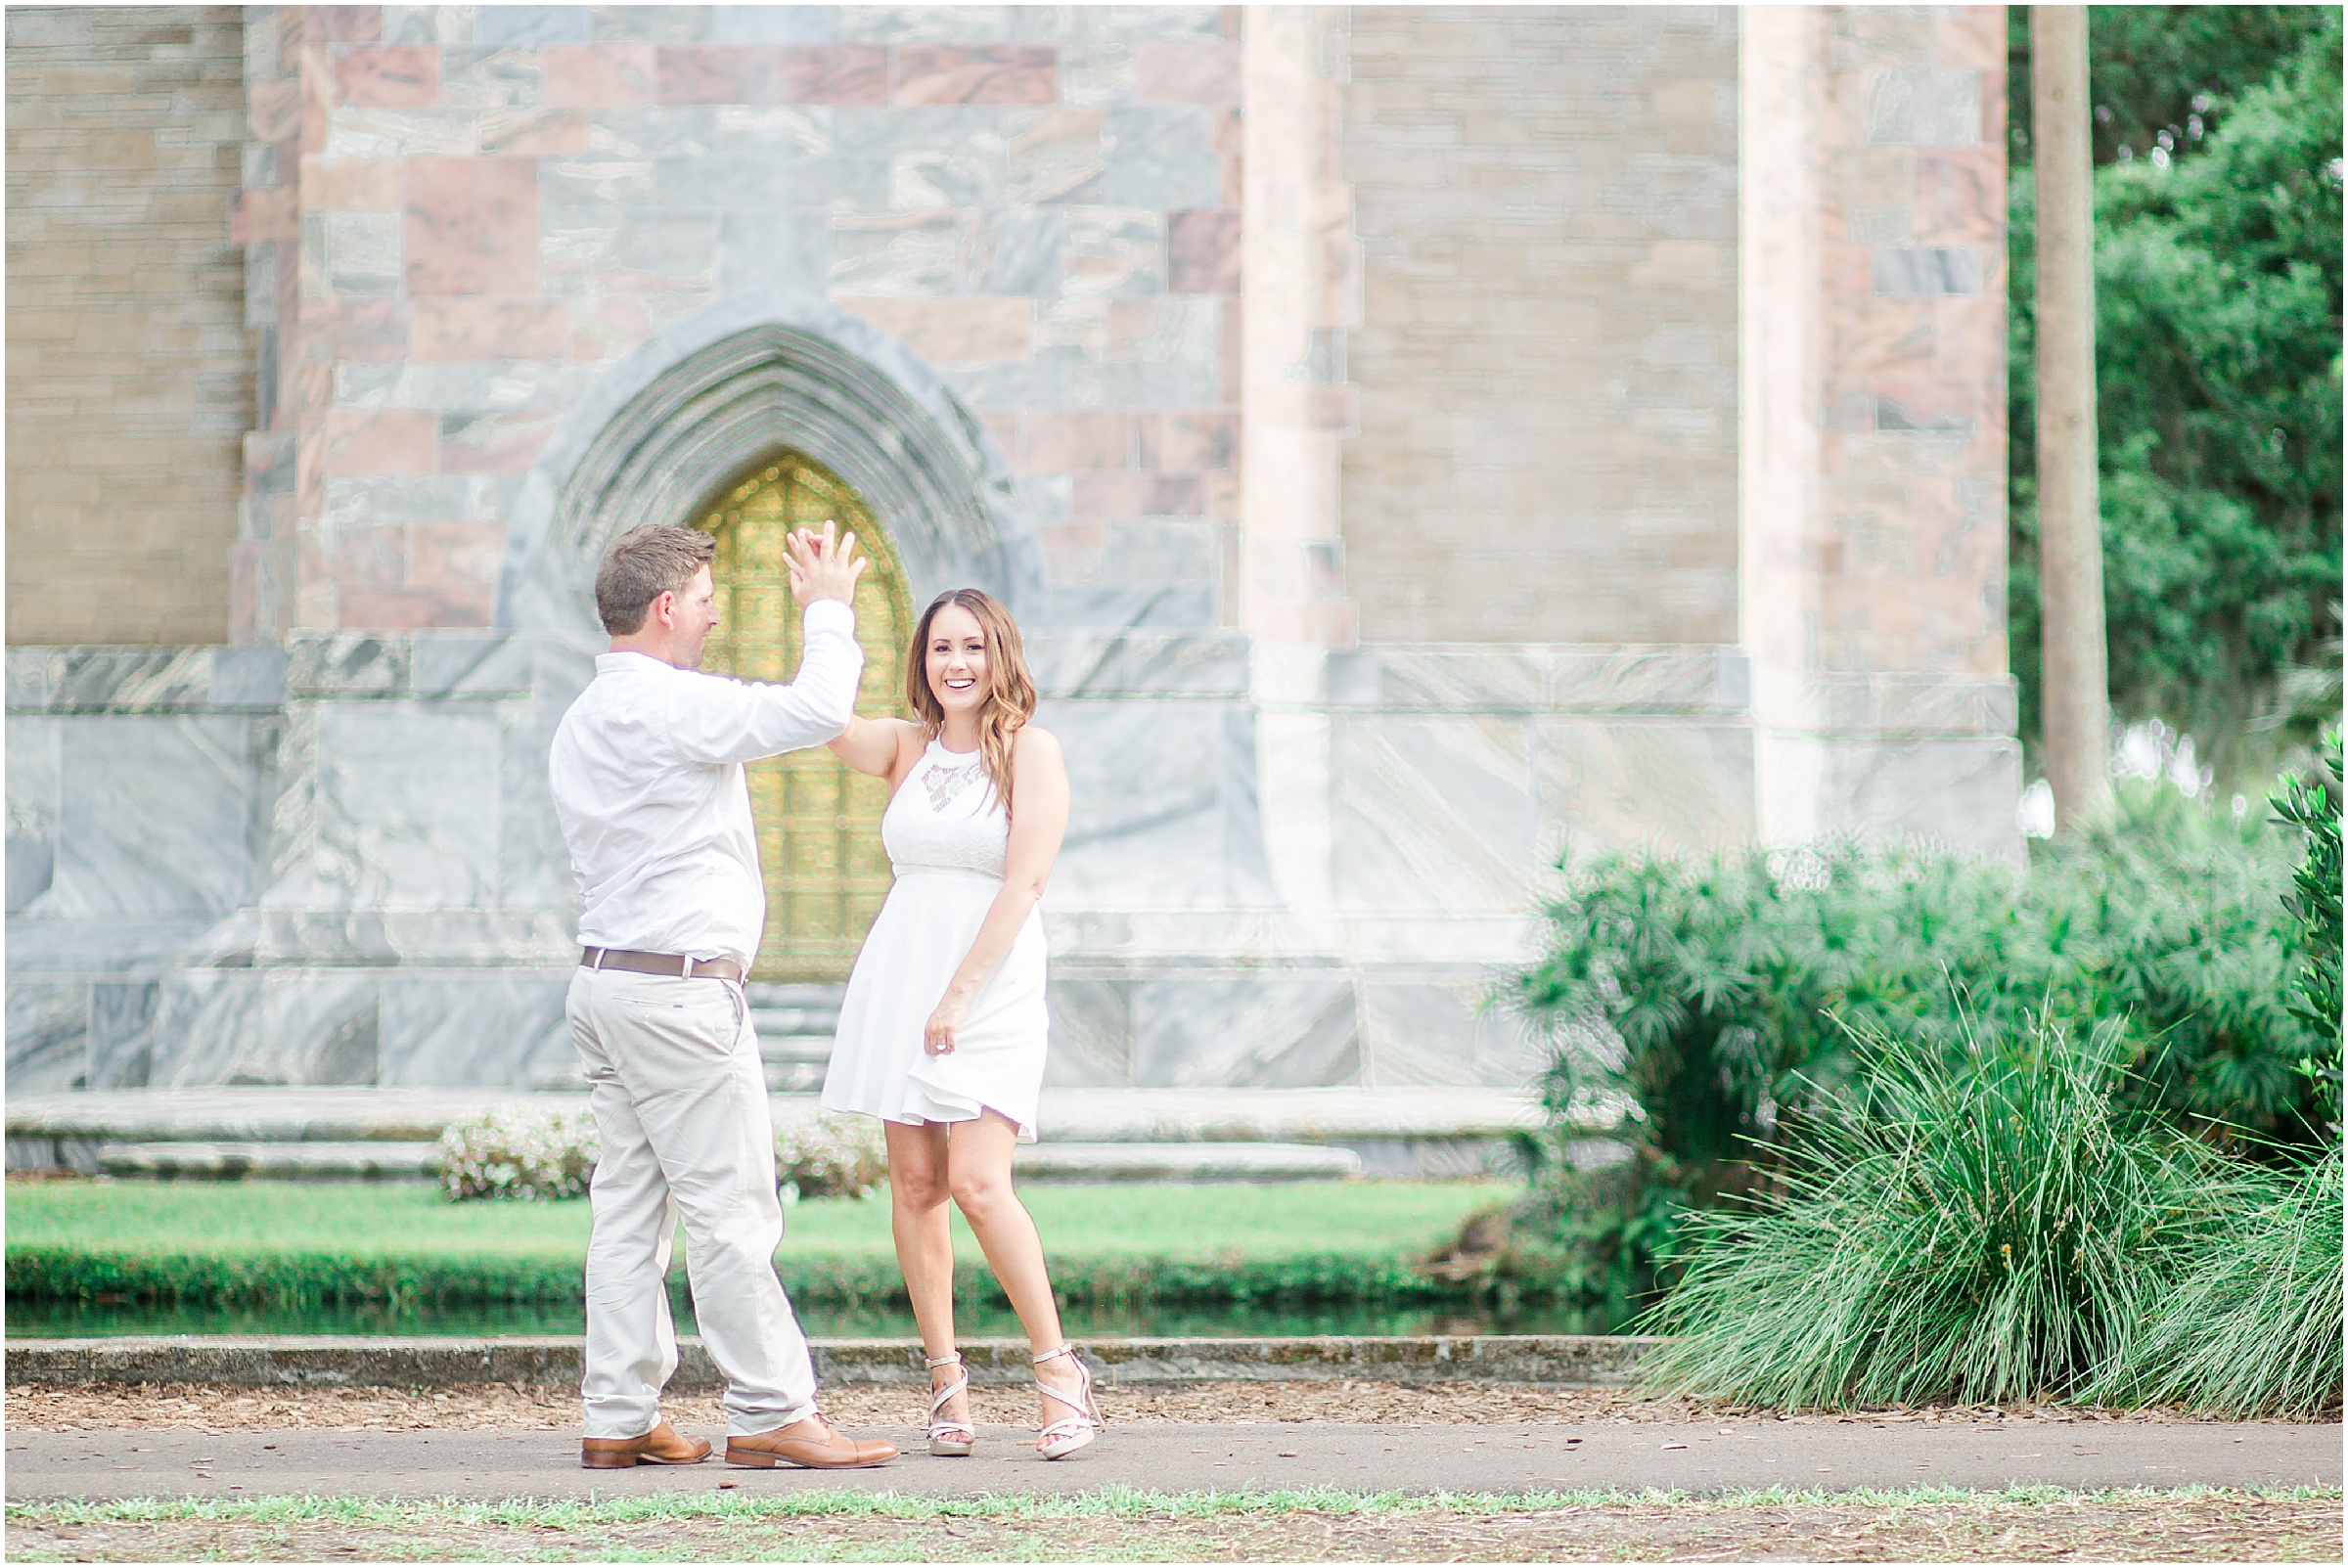 Jessica & Brad, newly engaged, at Bok Tower Gardens in Lake Wales, Florida.